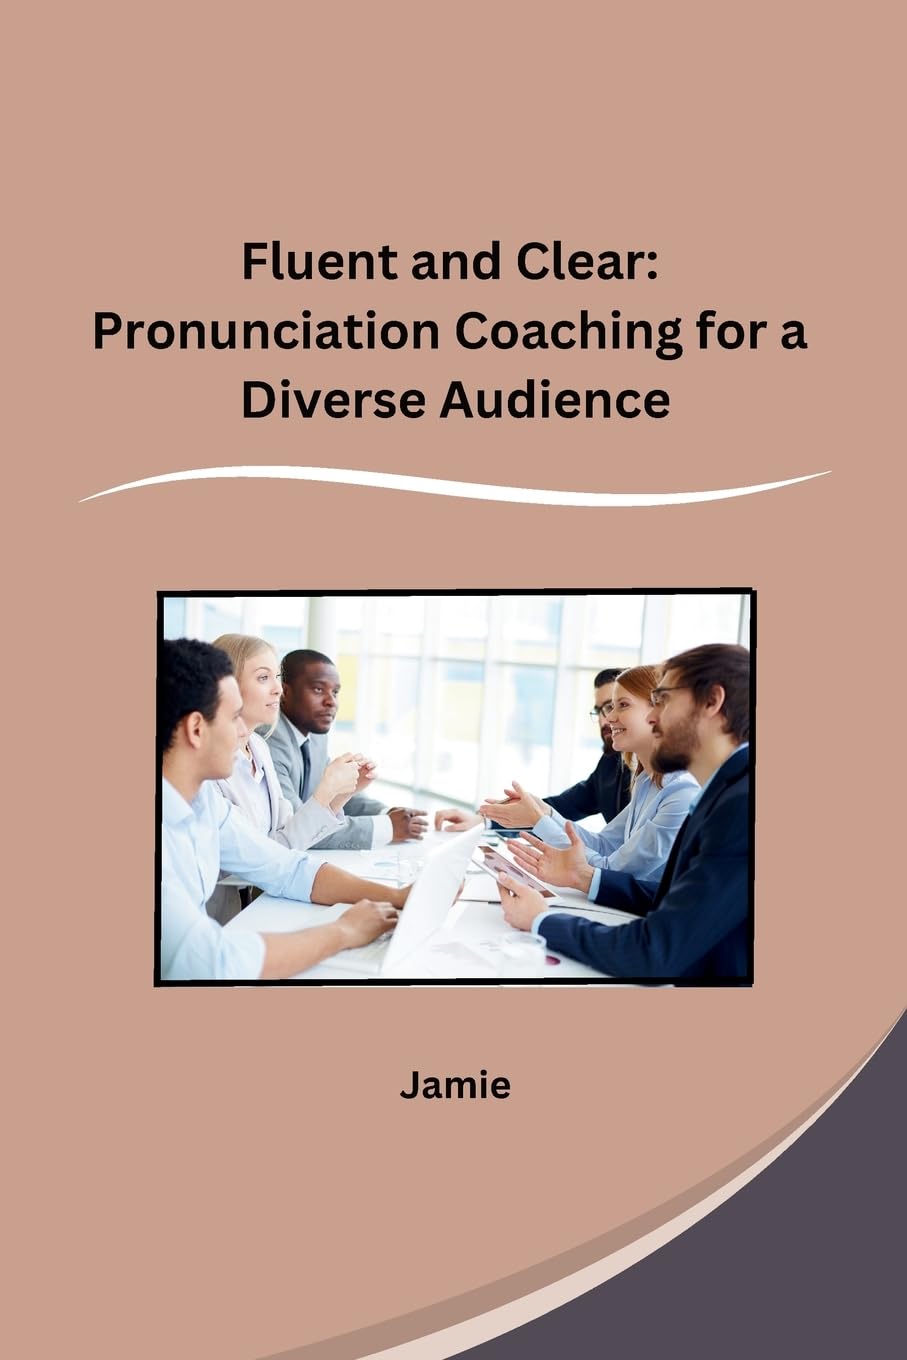 Fluent and Clear: Pronunciation Coaching for a Diverse Audience